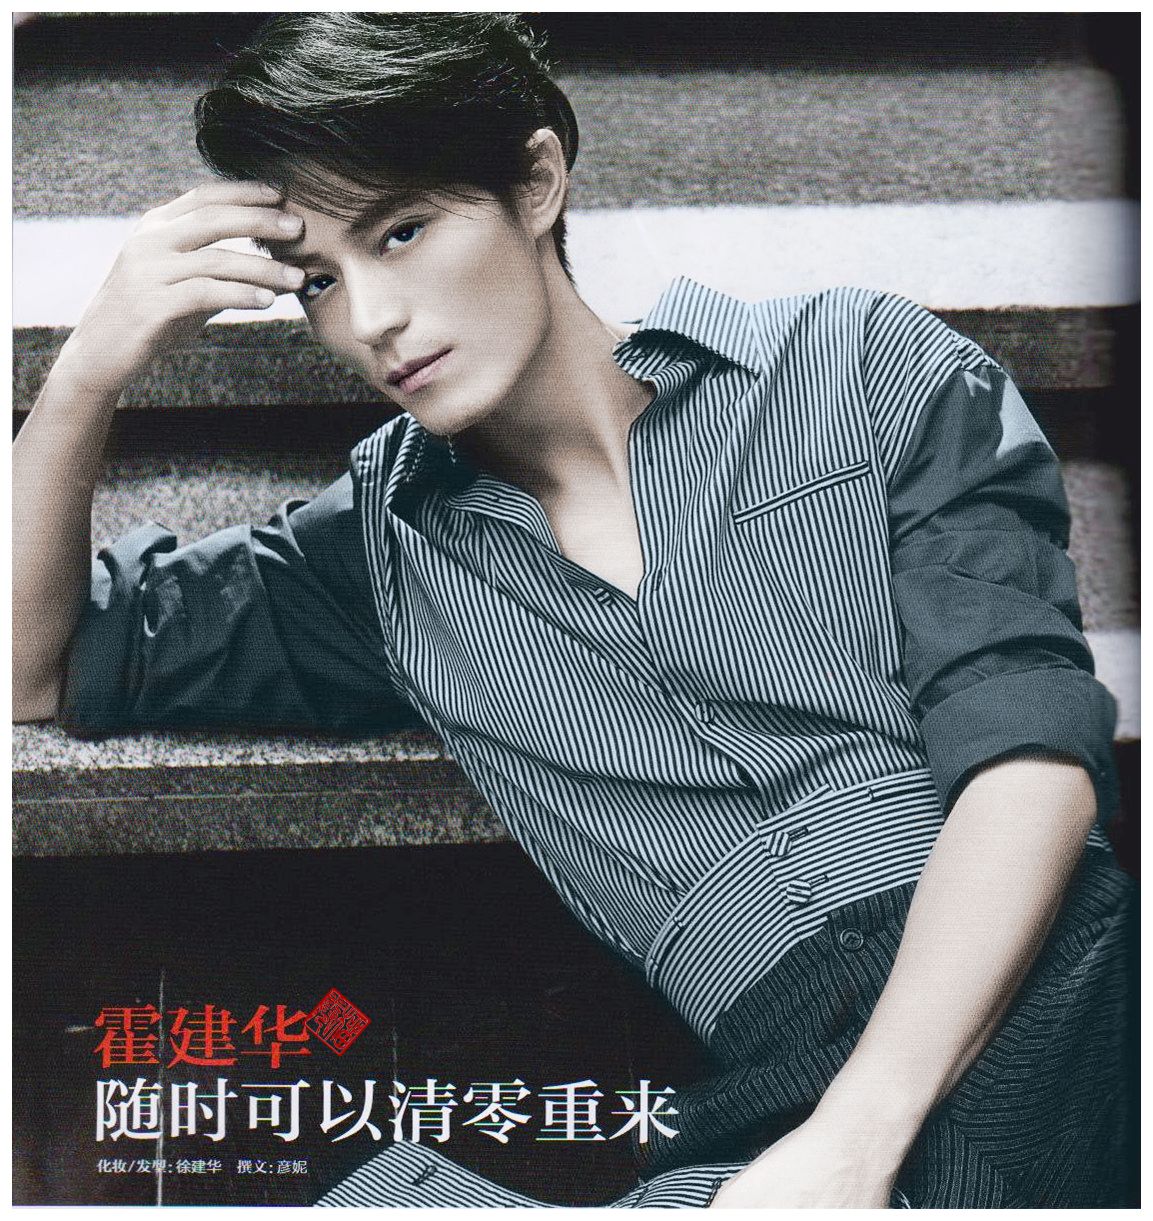 wallacehuo61